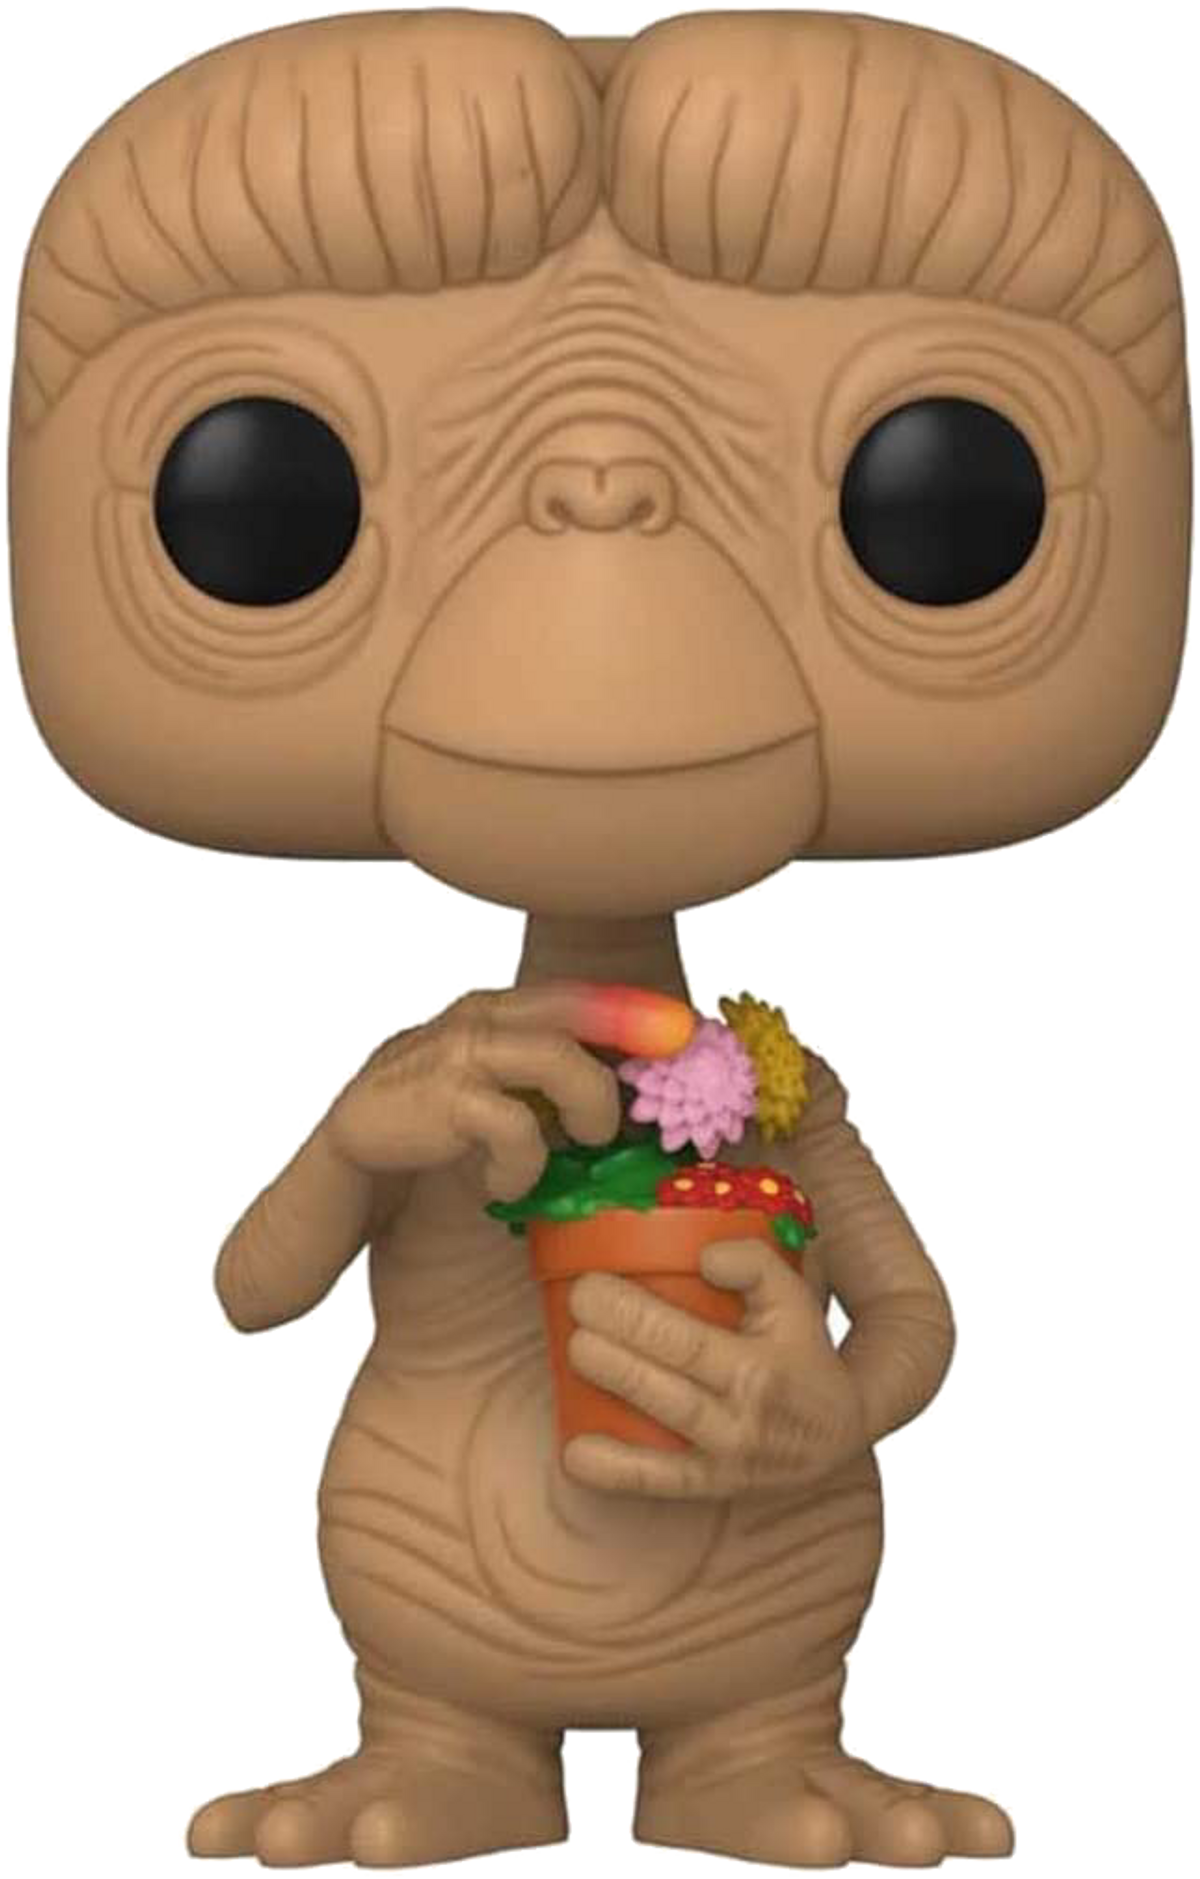 POP - E.T. with - E.T. Anniversary Flowers 40th